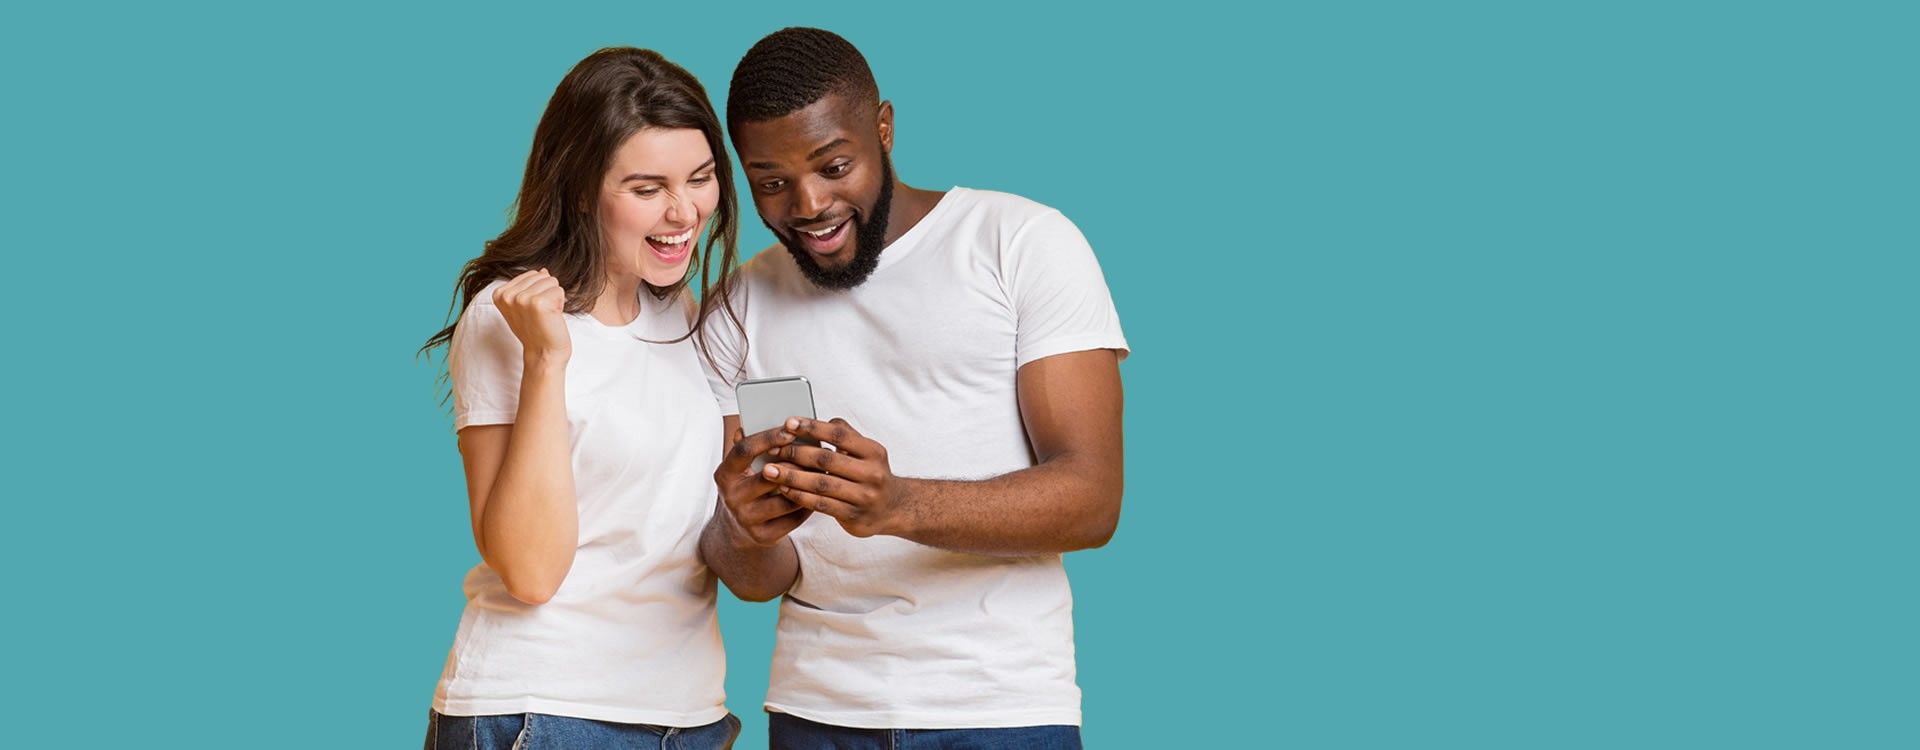 Man and woman looking at a  mobile phone